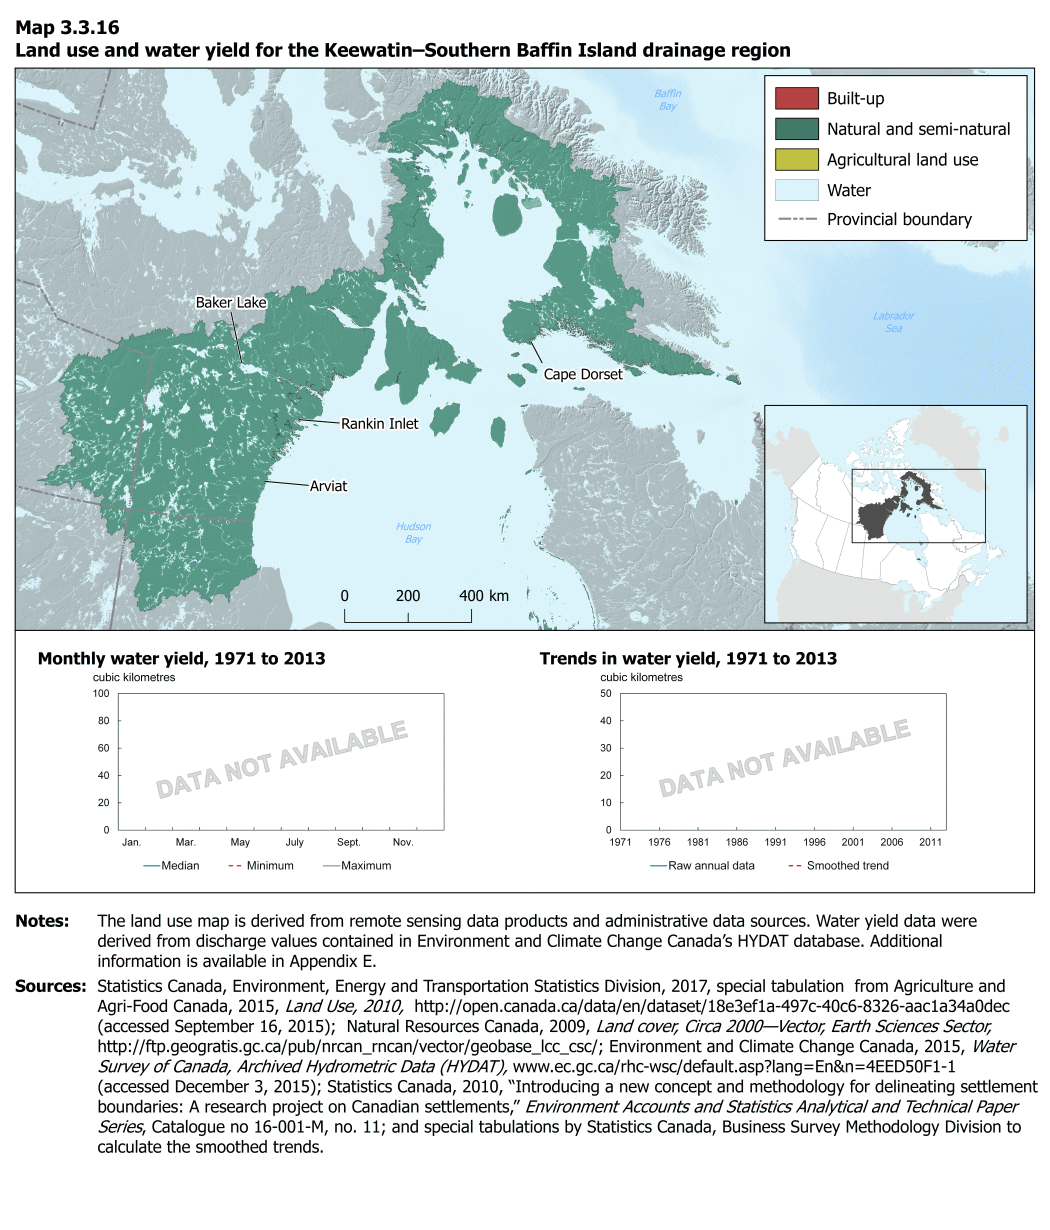 Map 3.3.16 Land use and water yield for the Keewatin–Southern Baffin Island drainage region